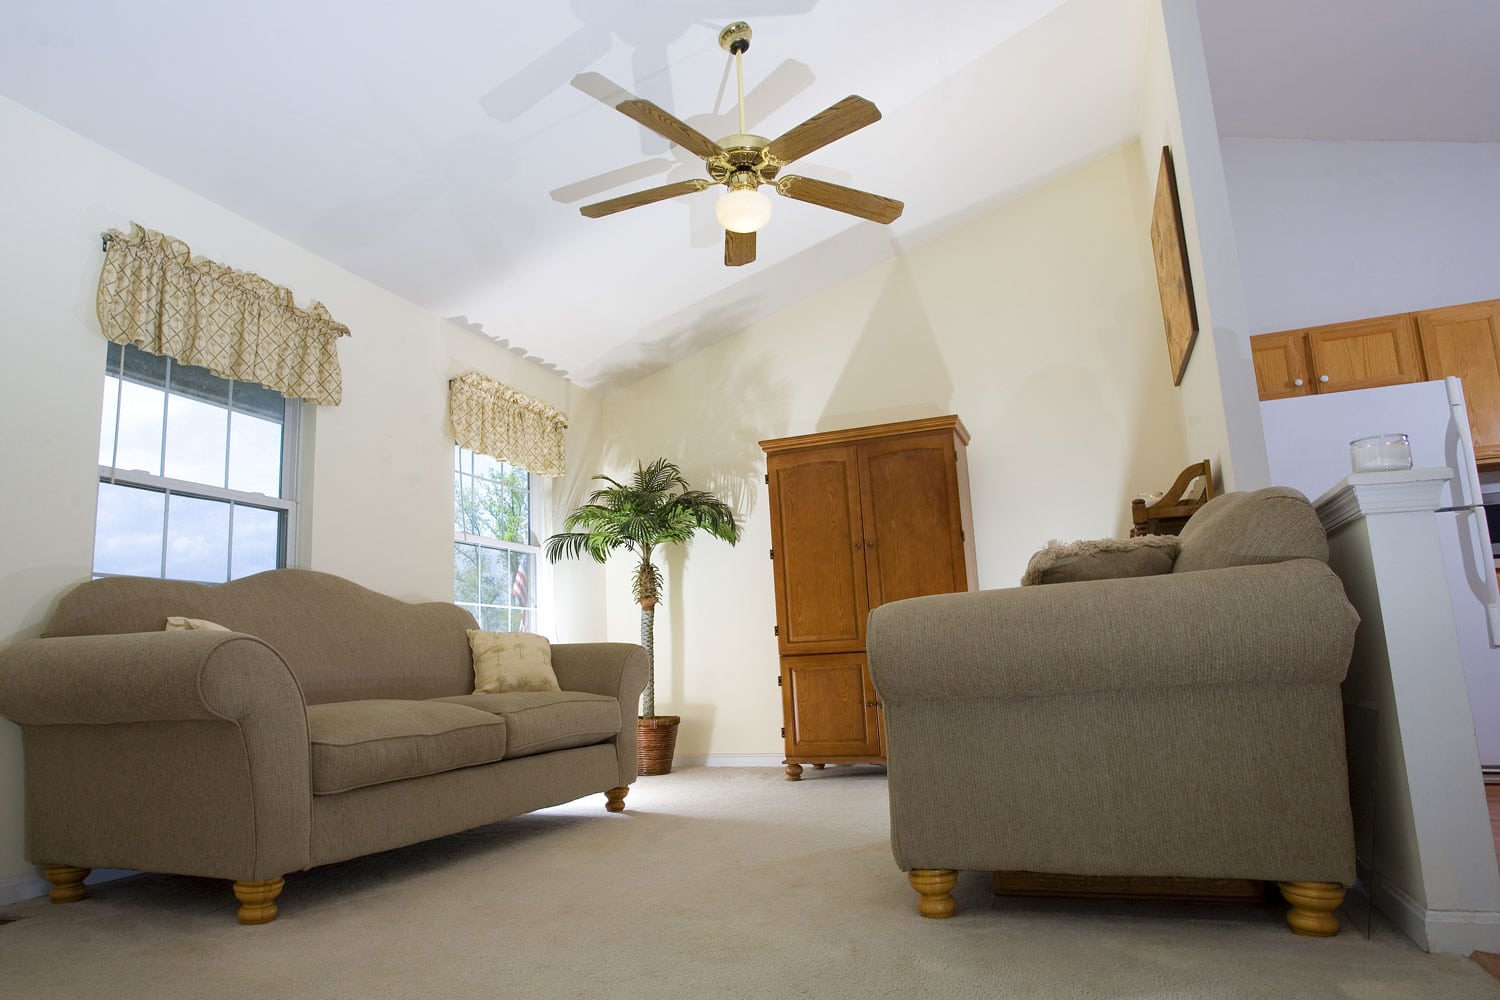 A spacious living room interior with gray sofas, white walls and a ceiling fan